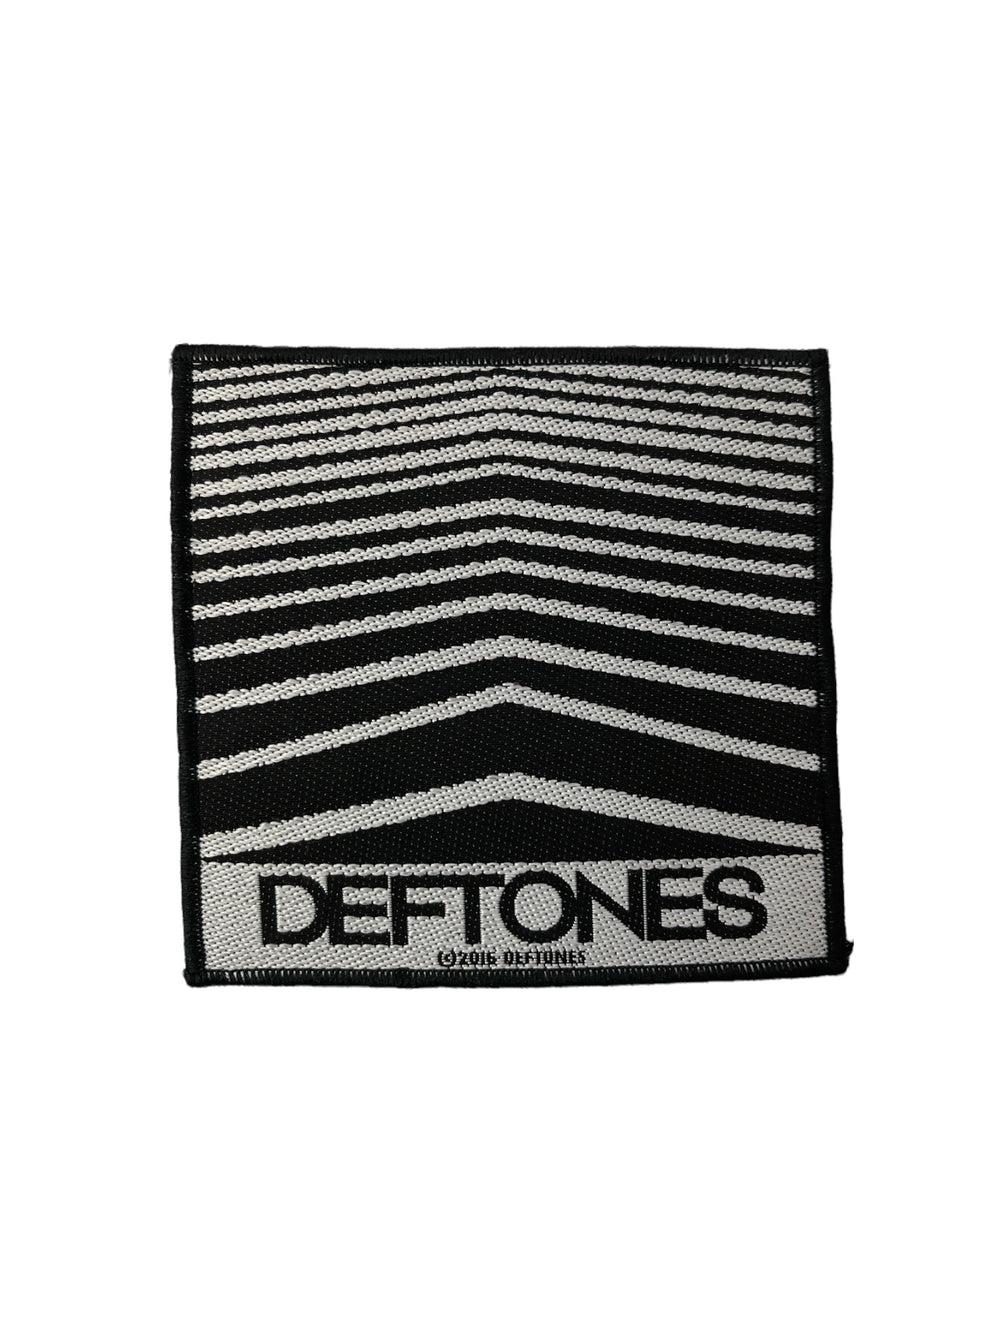 Deftones Stripes  Official Sew On Woven Patch Brand New